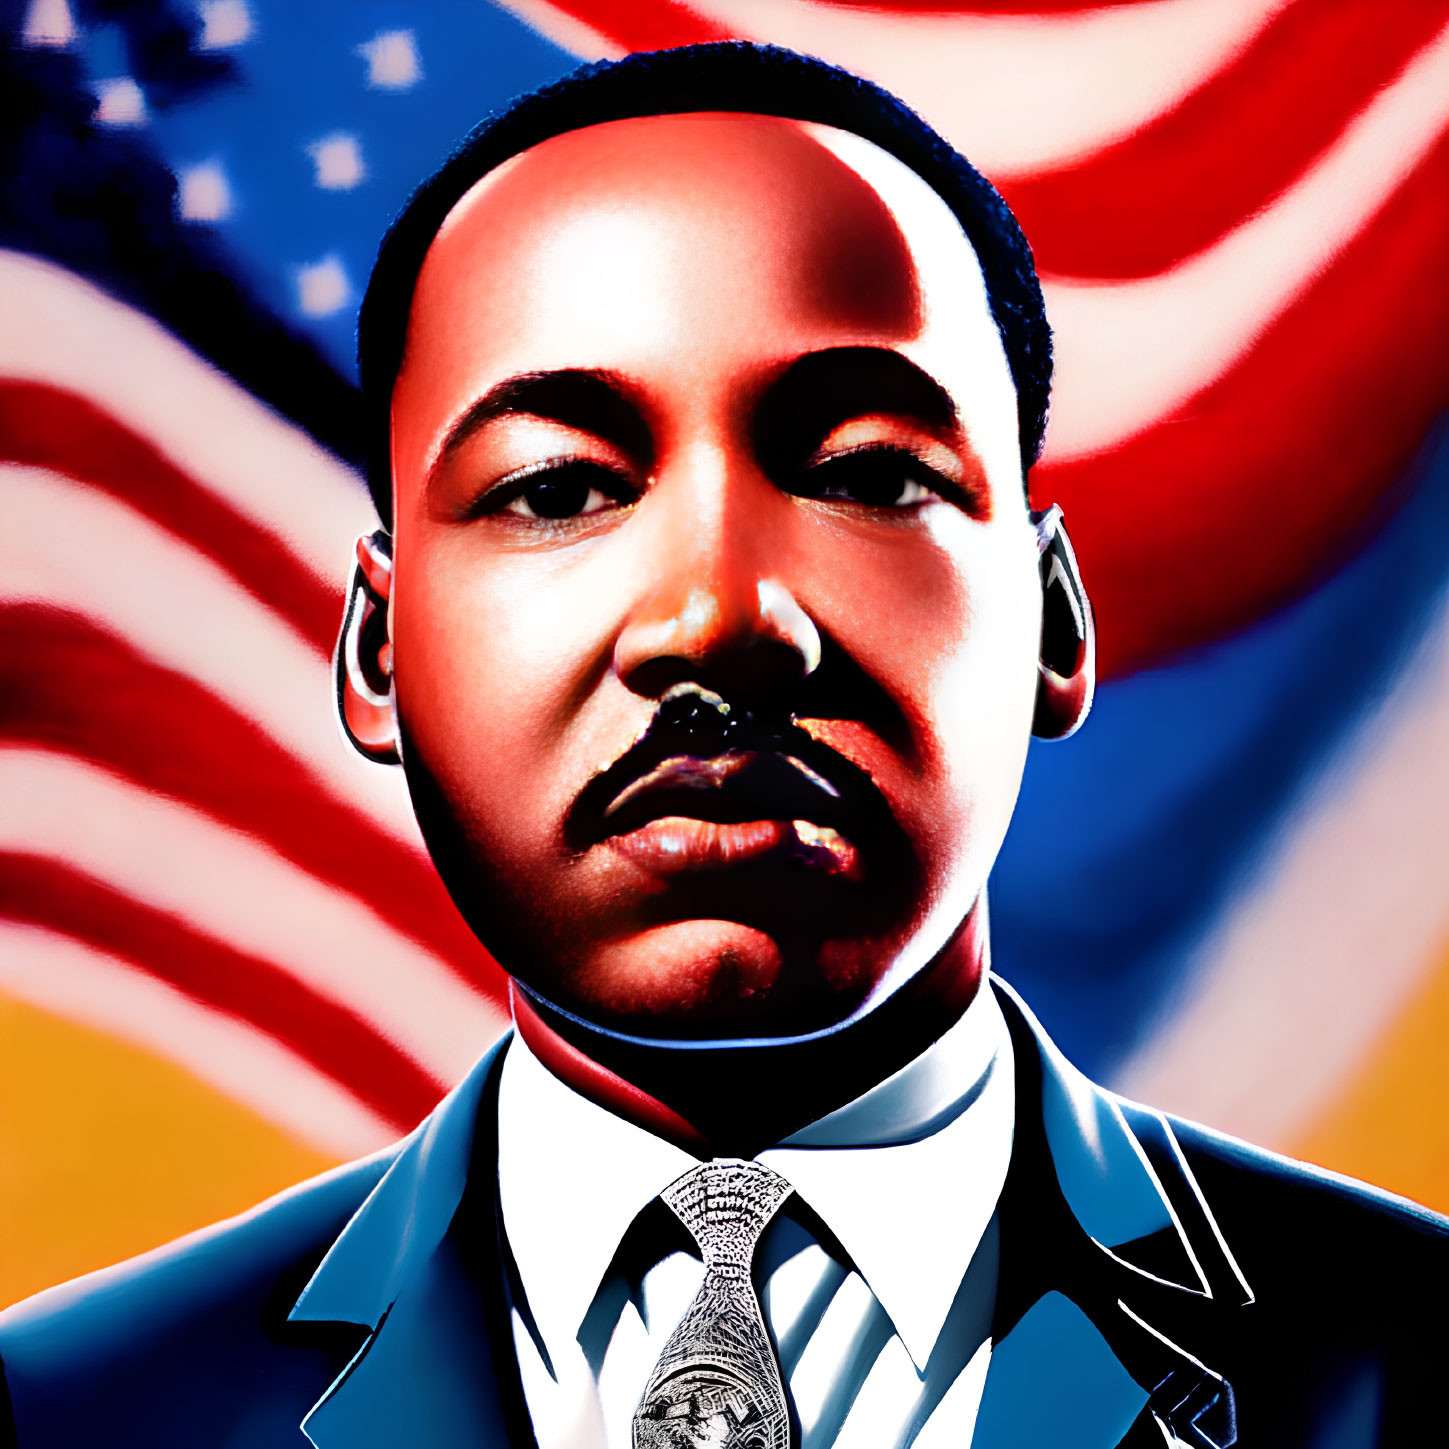 Intense gaze portrait of Martin Luther King Jr. in suit and tie on American flag backdrop